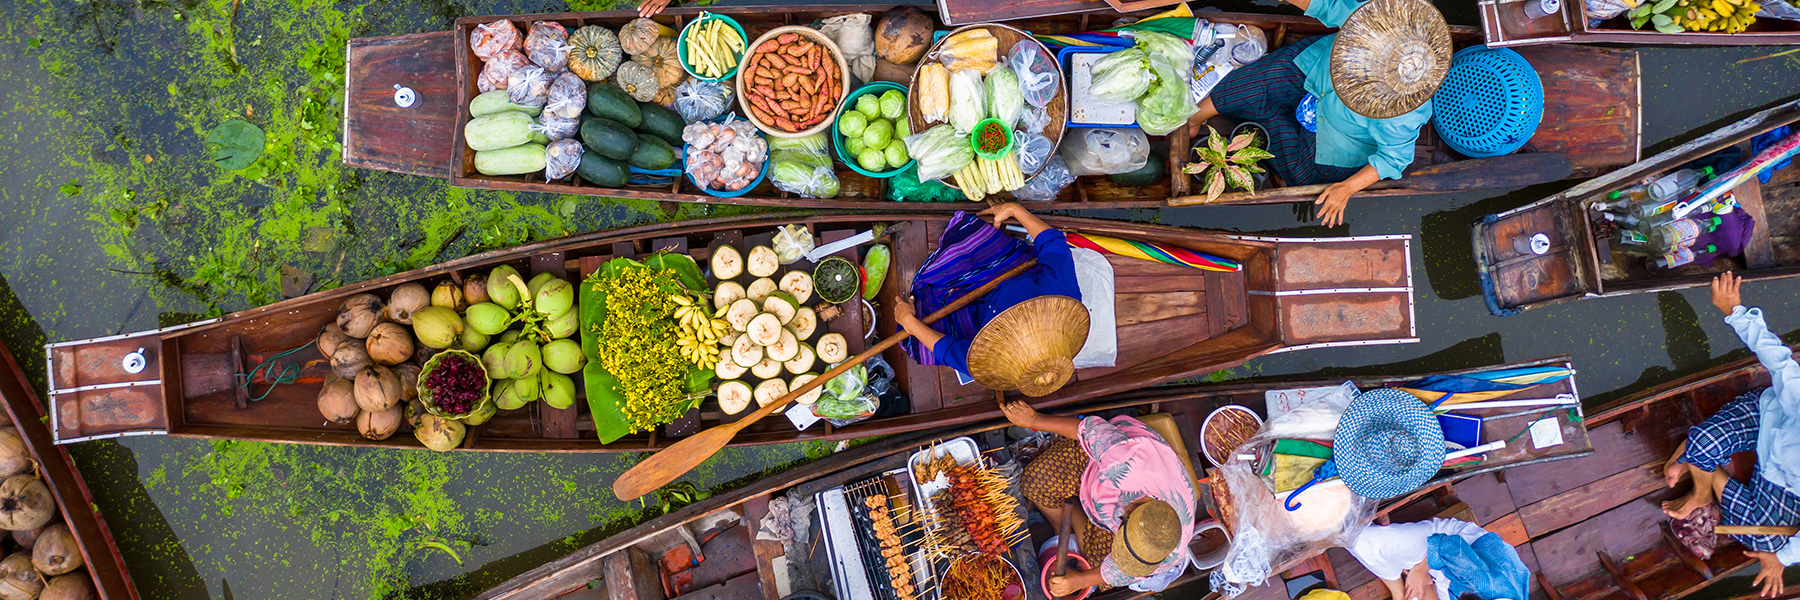 aerial view of the famous floating market in Thailand